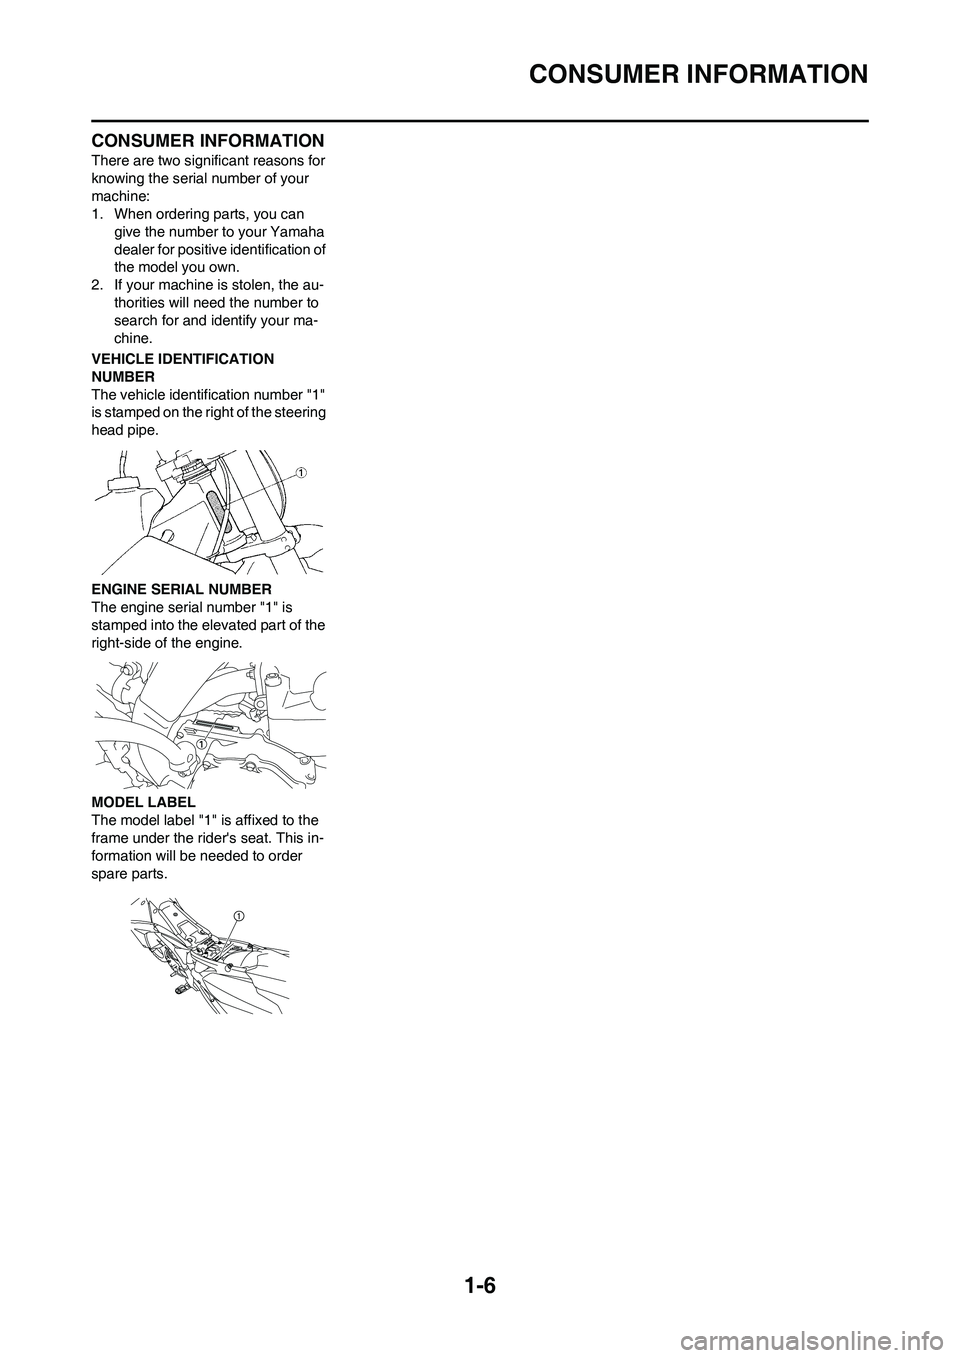 YAMAHA YZ450F 2010  Owners Manual 1-6
CONSUMER INFORMATION
CONSUMER INFORMATION
There are two significant reasons for 
knowing the serial number of your 
machine:
1. When ordering parts, you can 
give the number to your Yamaha 
dealer